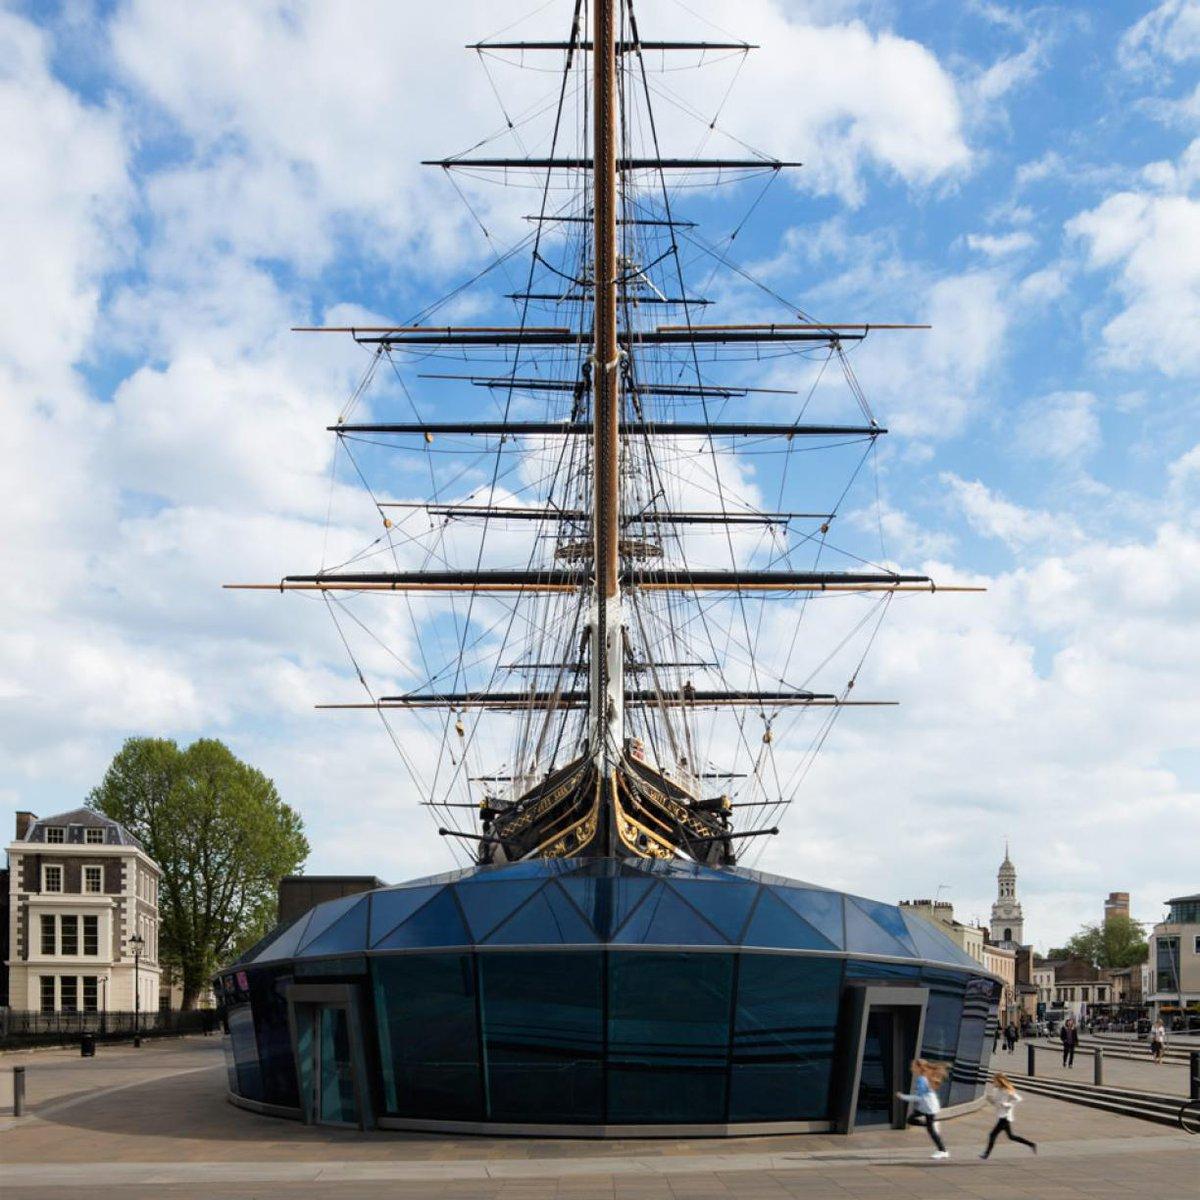 Ship S Birthday Blog 147th Anniversary Of Cutty Sark S Launch Royal Museums Greenwich